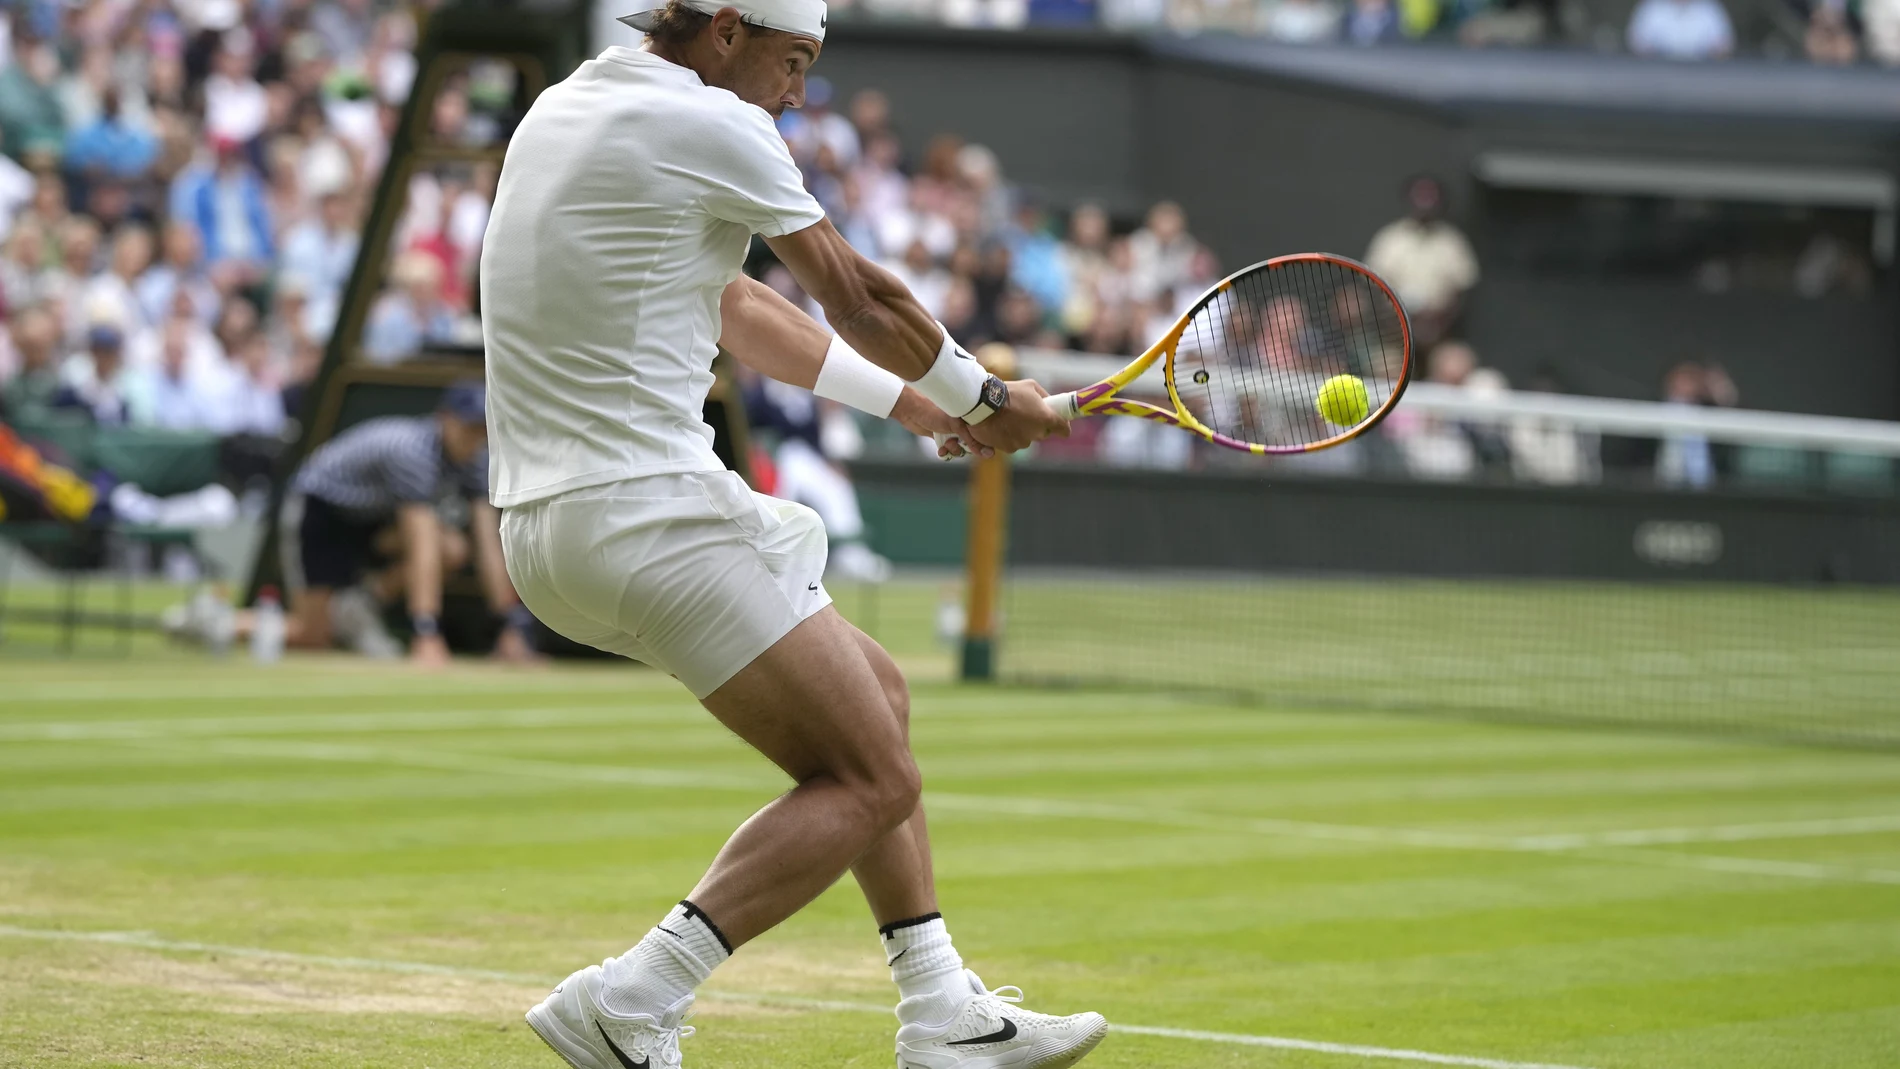 Spain's Rafael Nadal returns the ball to Italy's Lorenzo Sonego during a third round men's singles match on day six of the Wimbledon tennis championships in London, Saturday, July 2, 2022. (AP Photo/Alastair Grant)